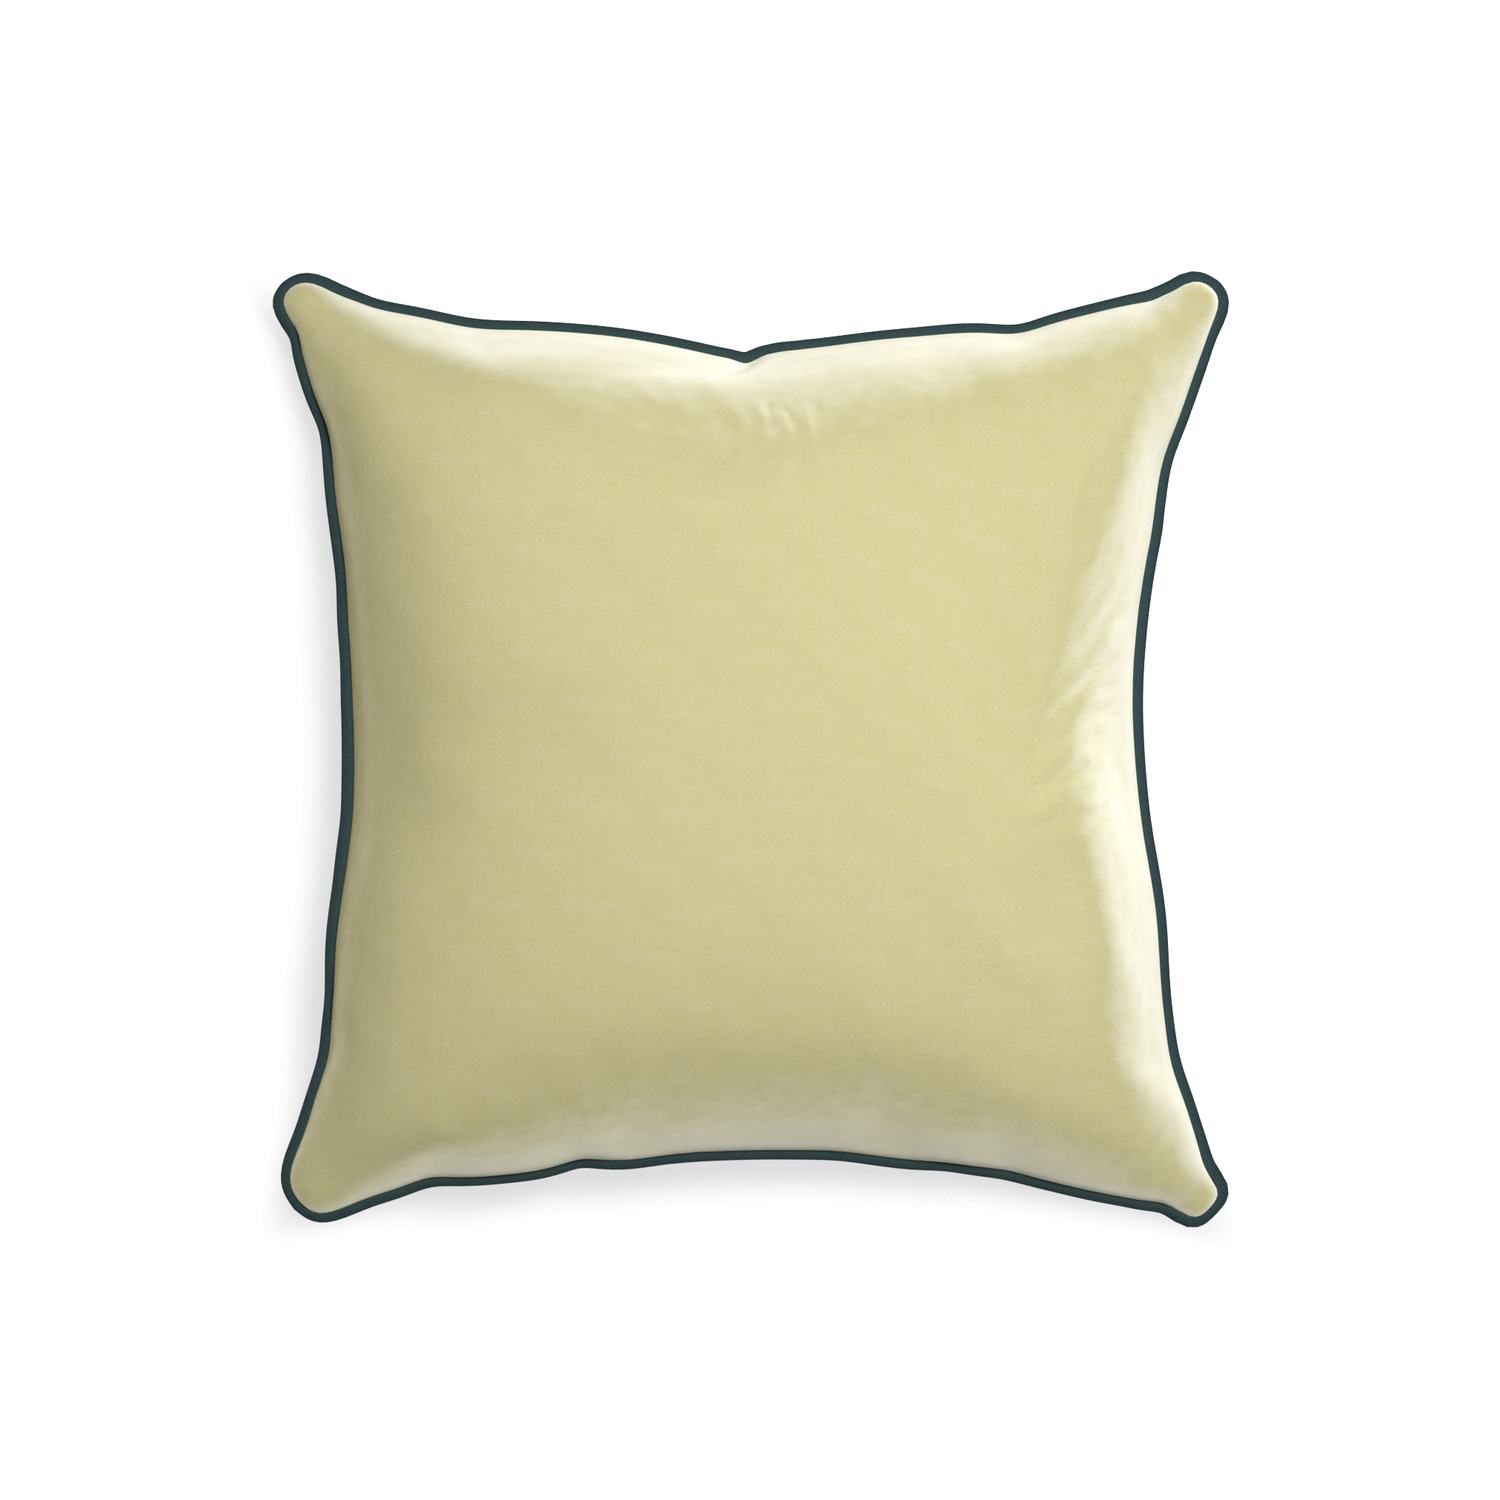 20-square pear velvet custom light greenpillow with p piping on white background